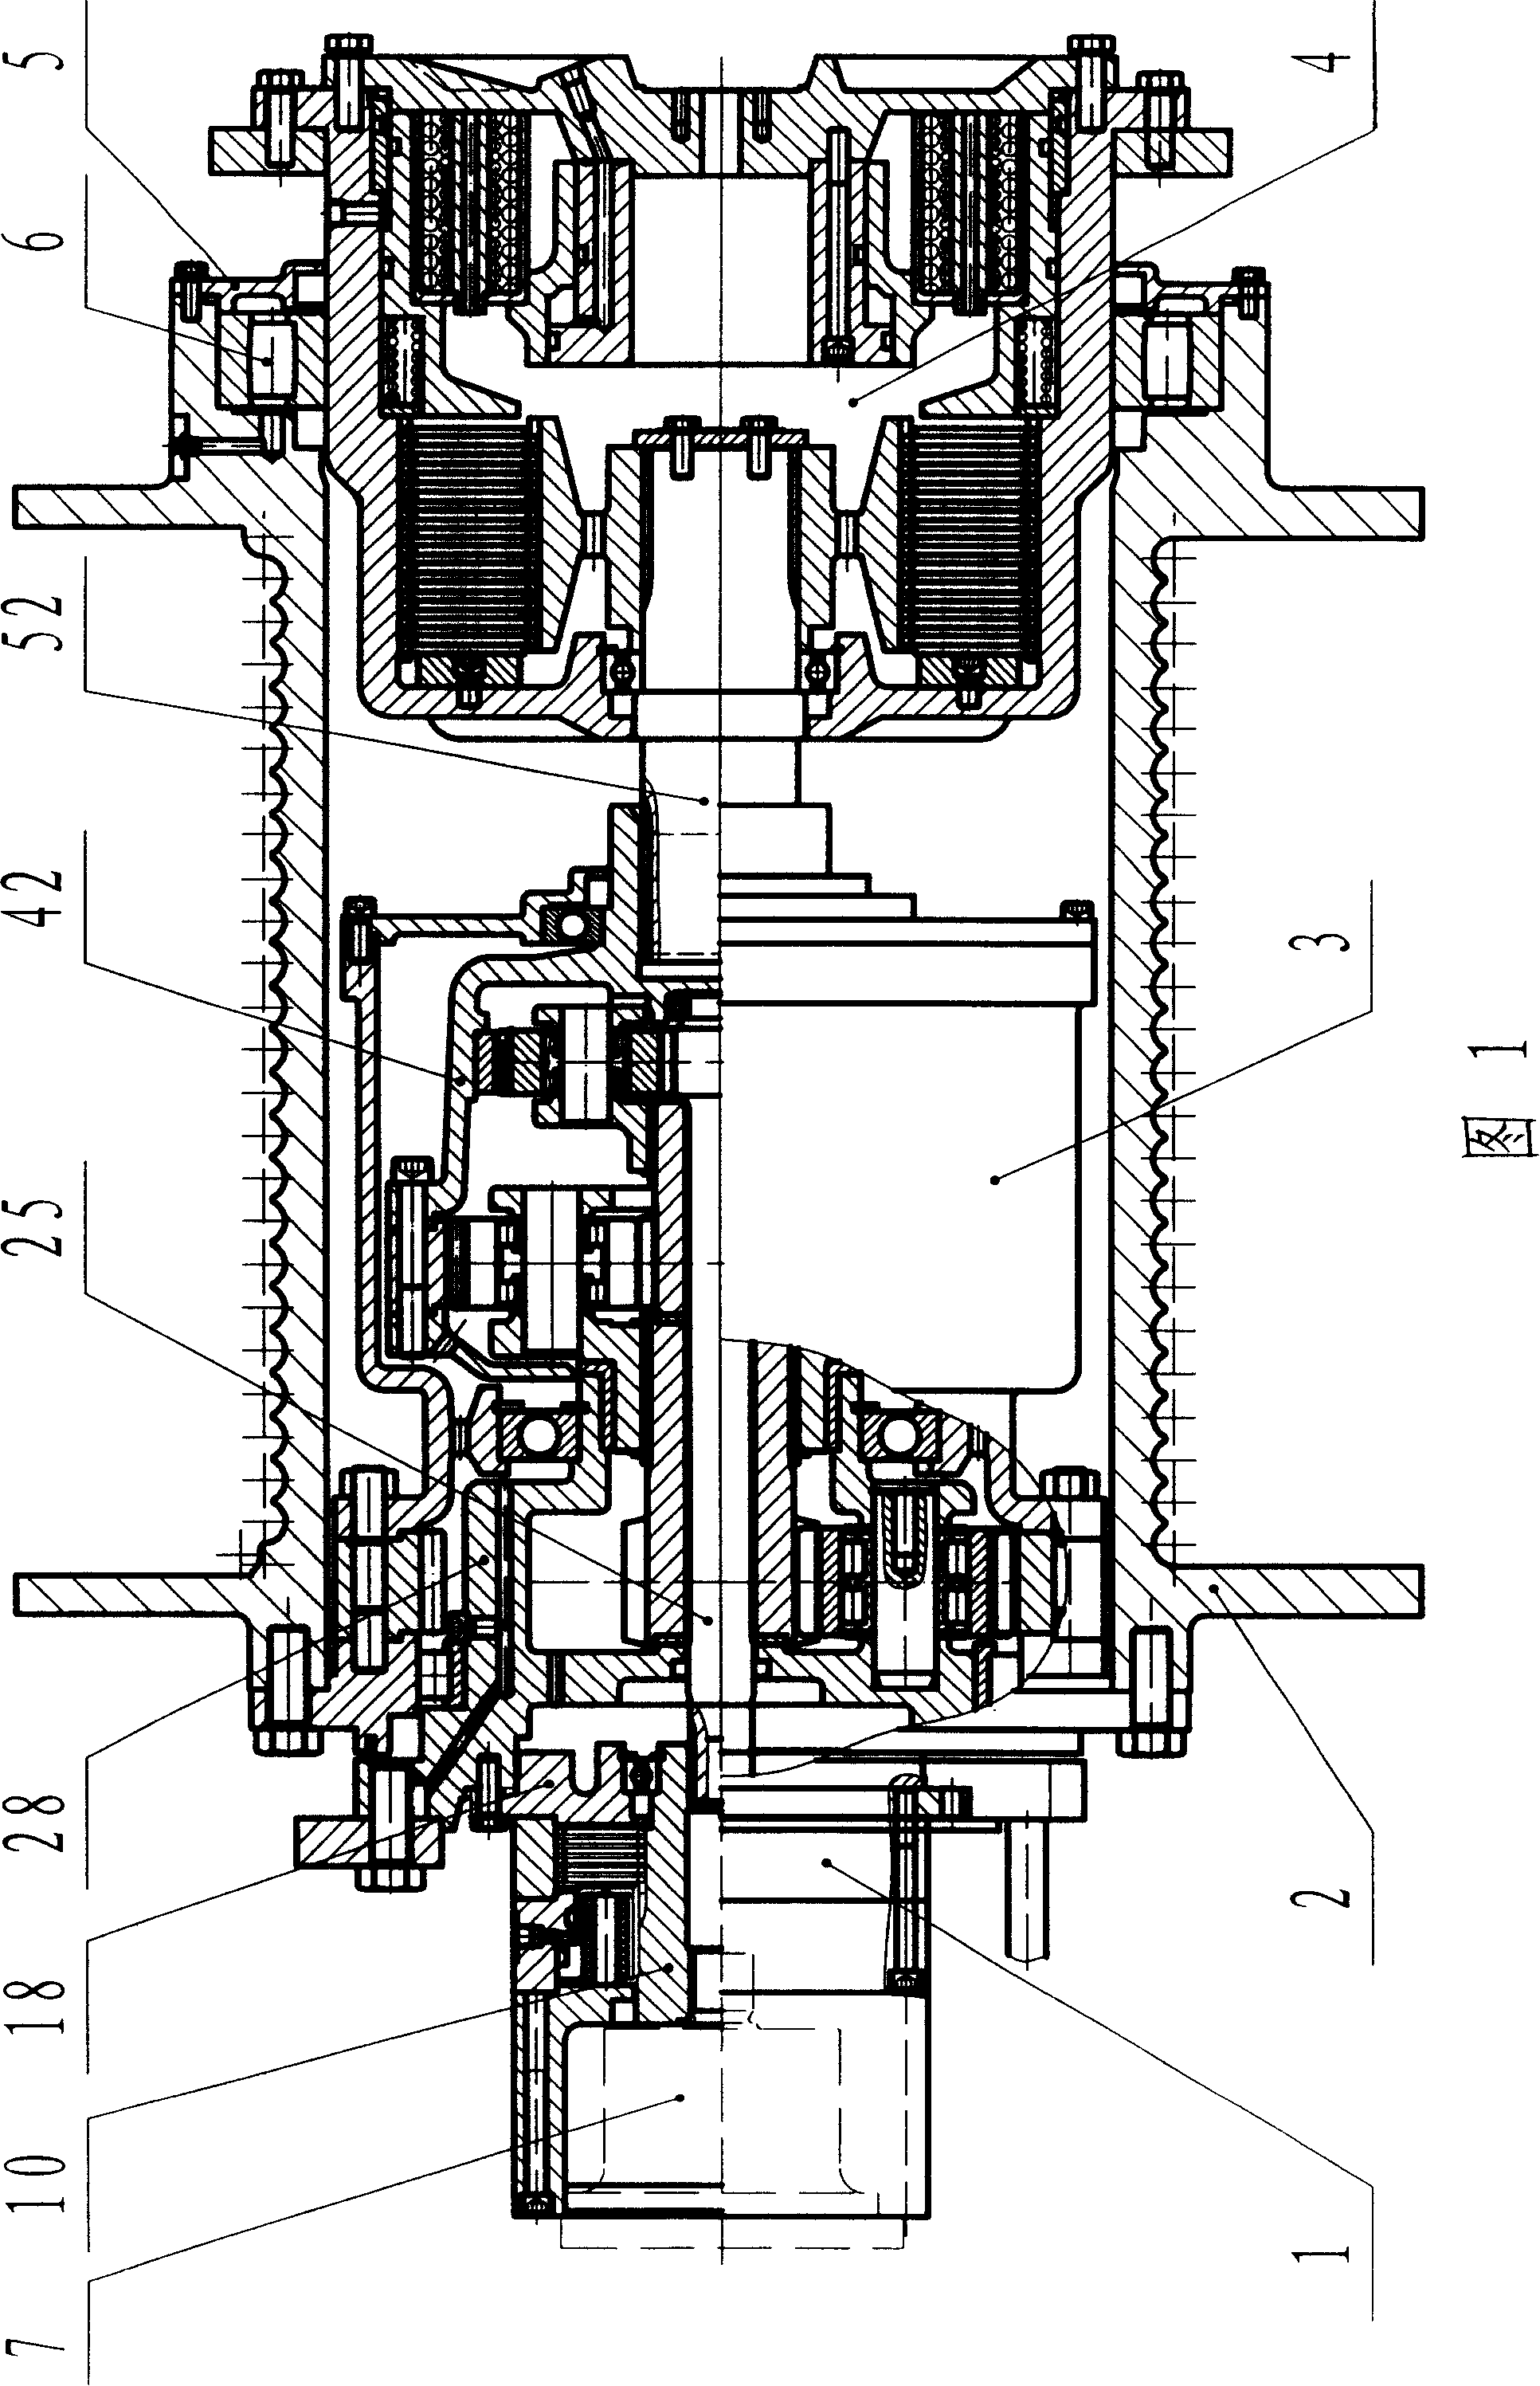 Winding machine with wet-type friction slice clutch having hollow hook lowering function